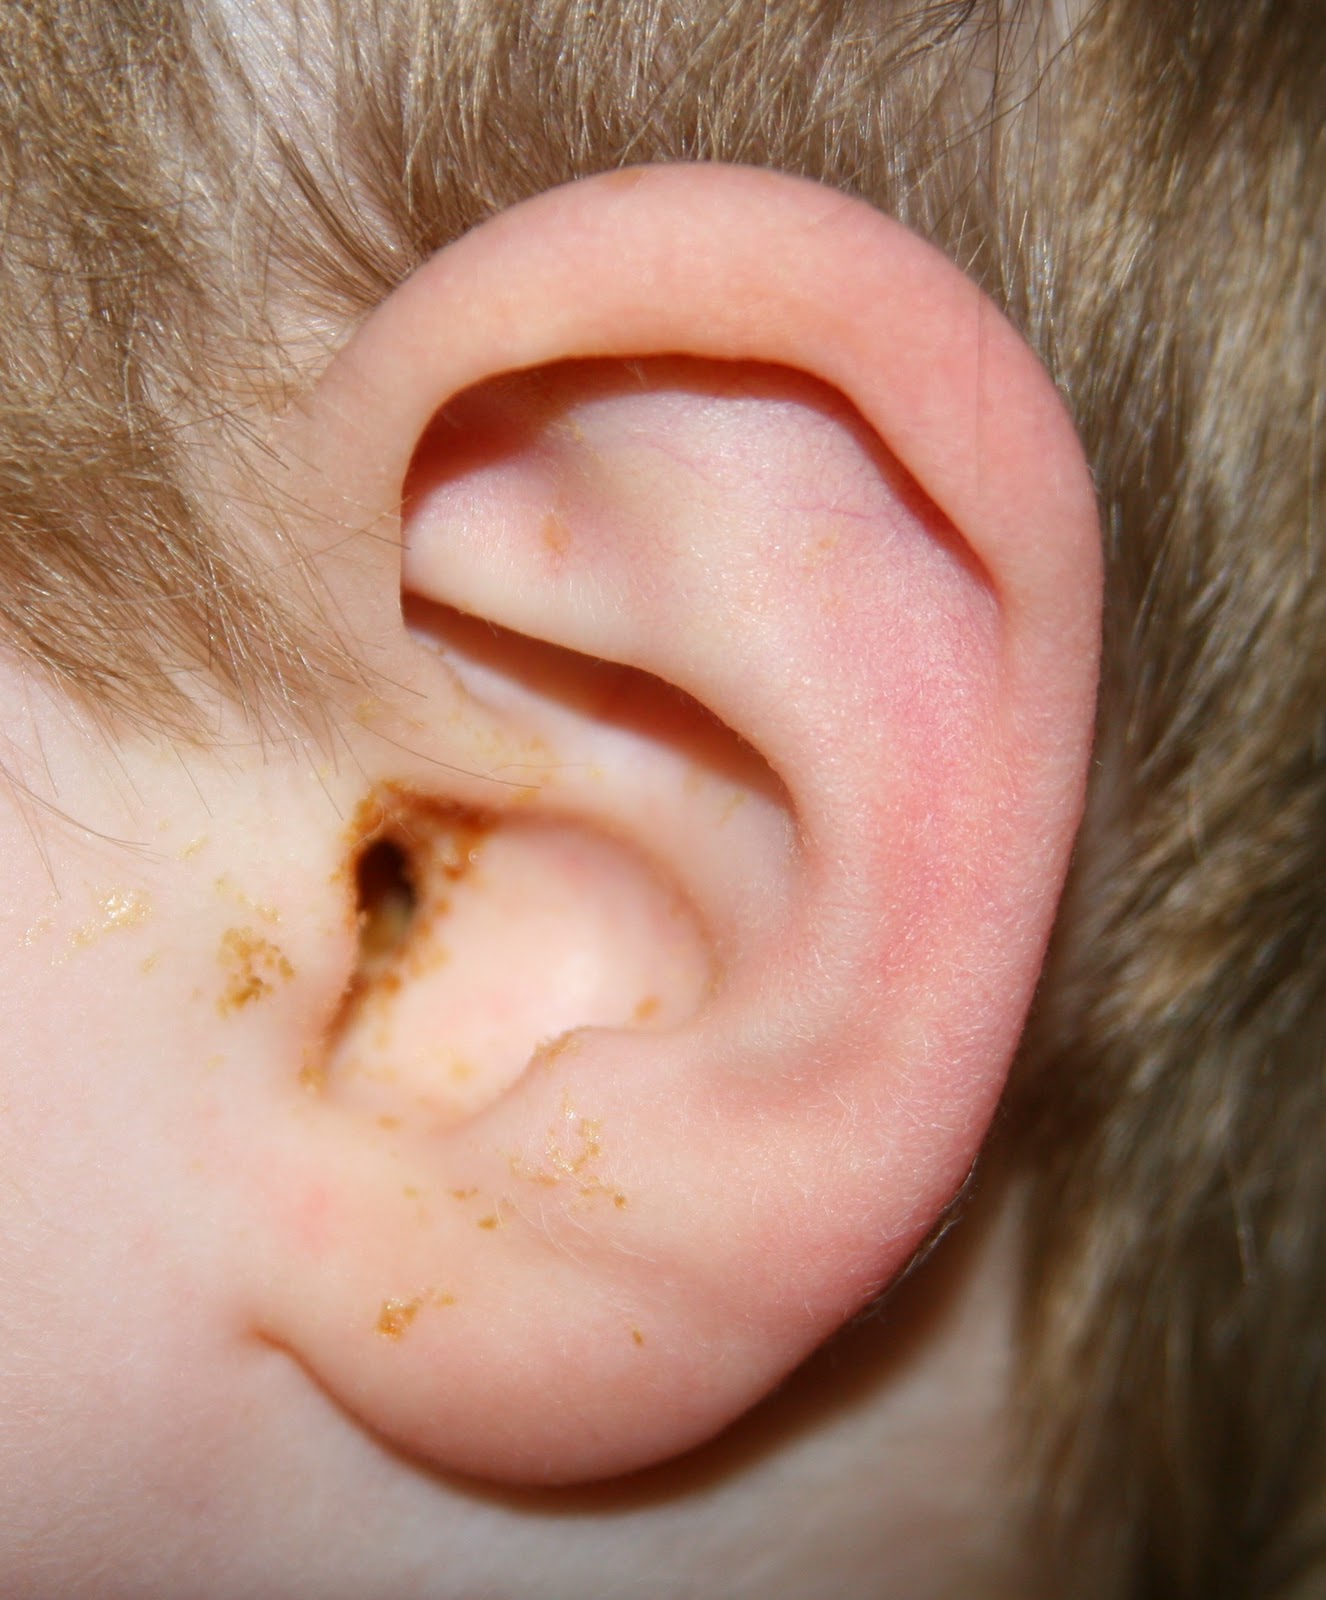 When Do Babies Develop Ear Infections?